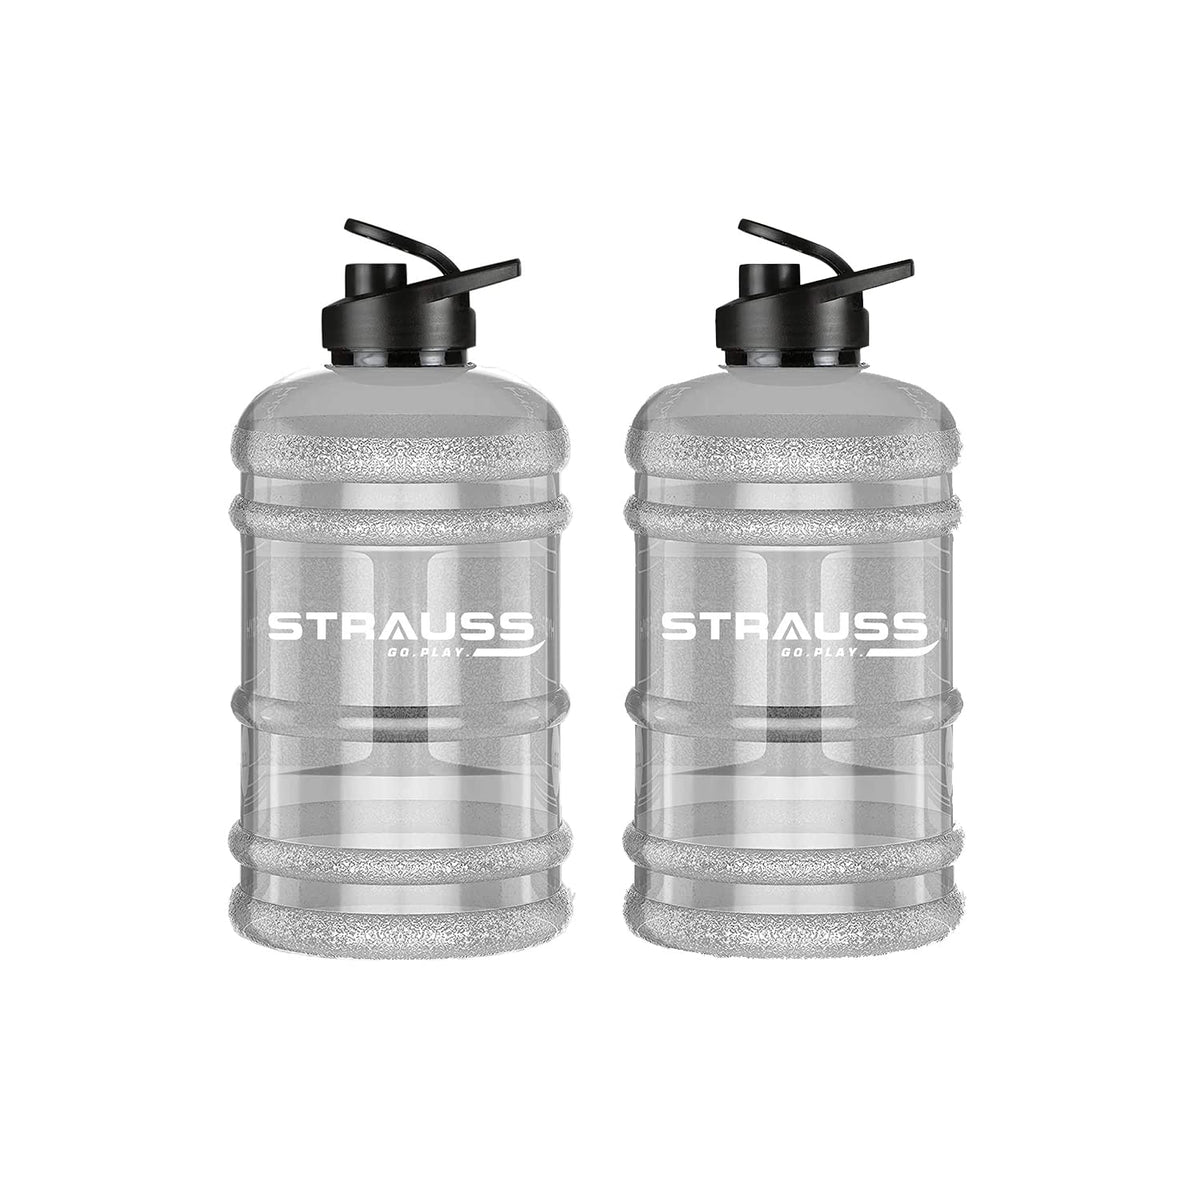 STRAUSS Gallon Shaker Water Bottle 1.5L with Mixer Ball, (Transparent, White Shade)